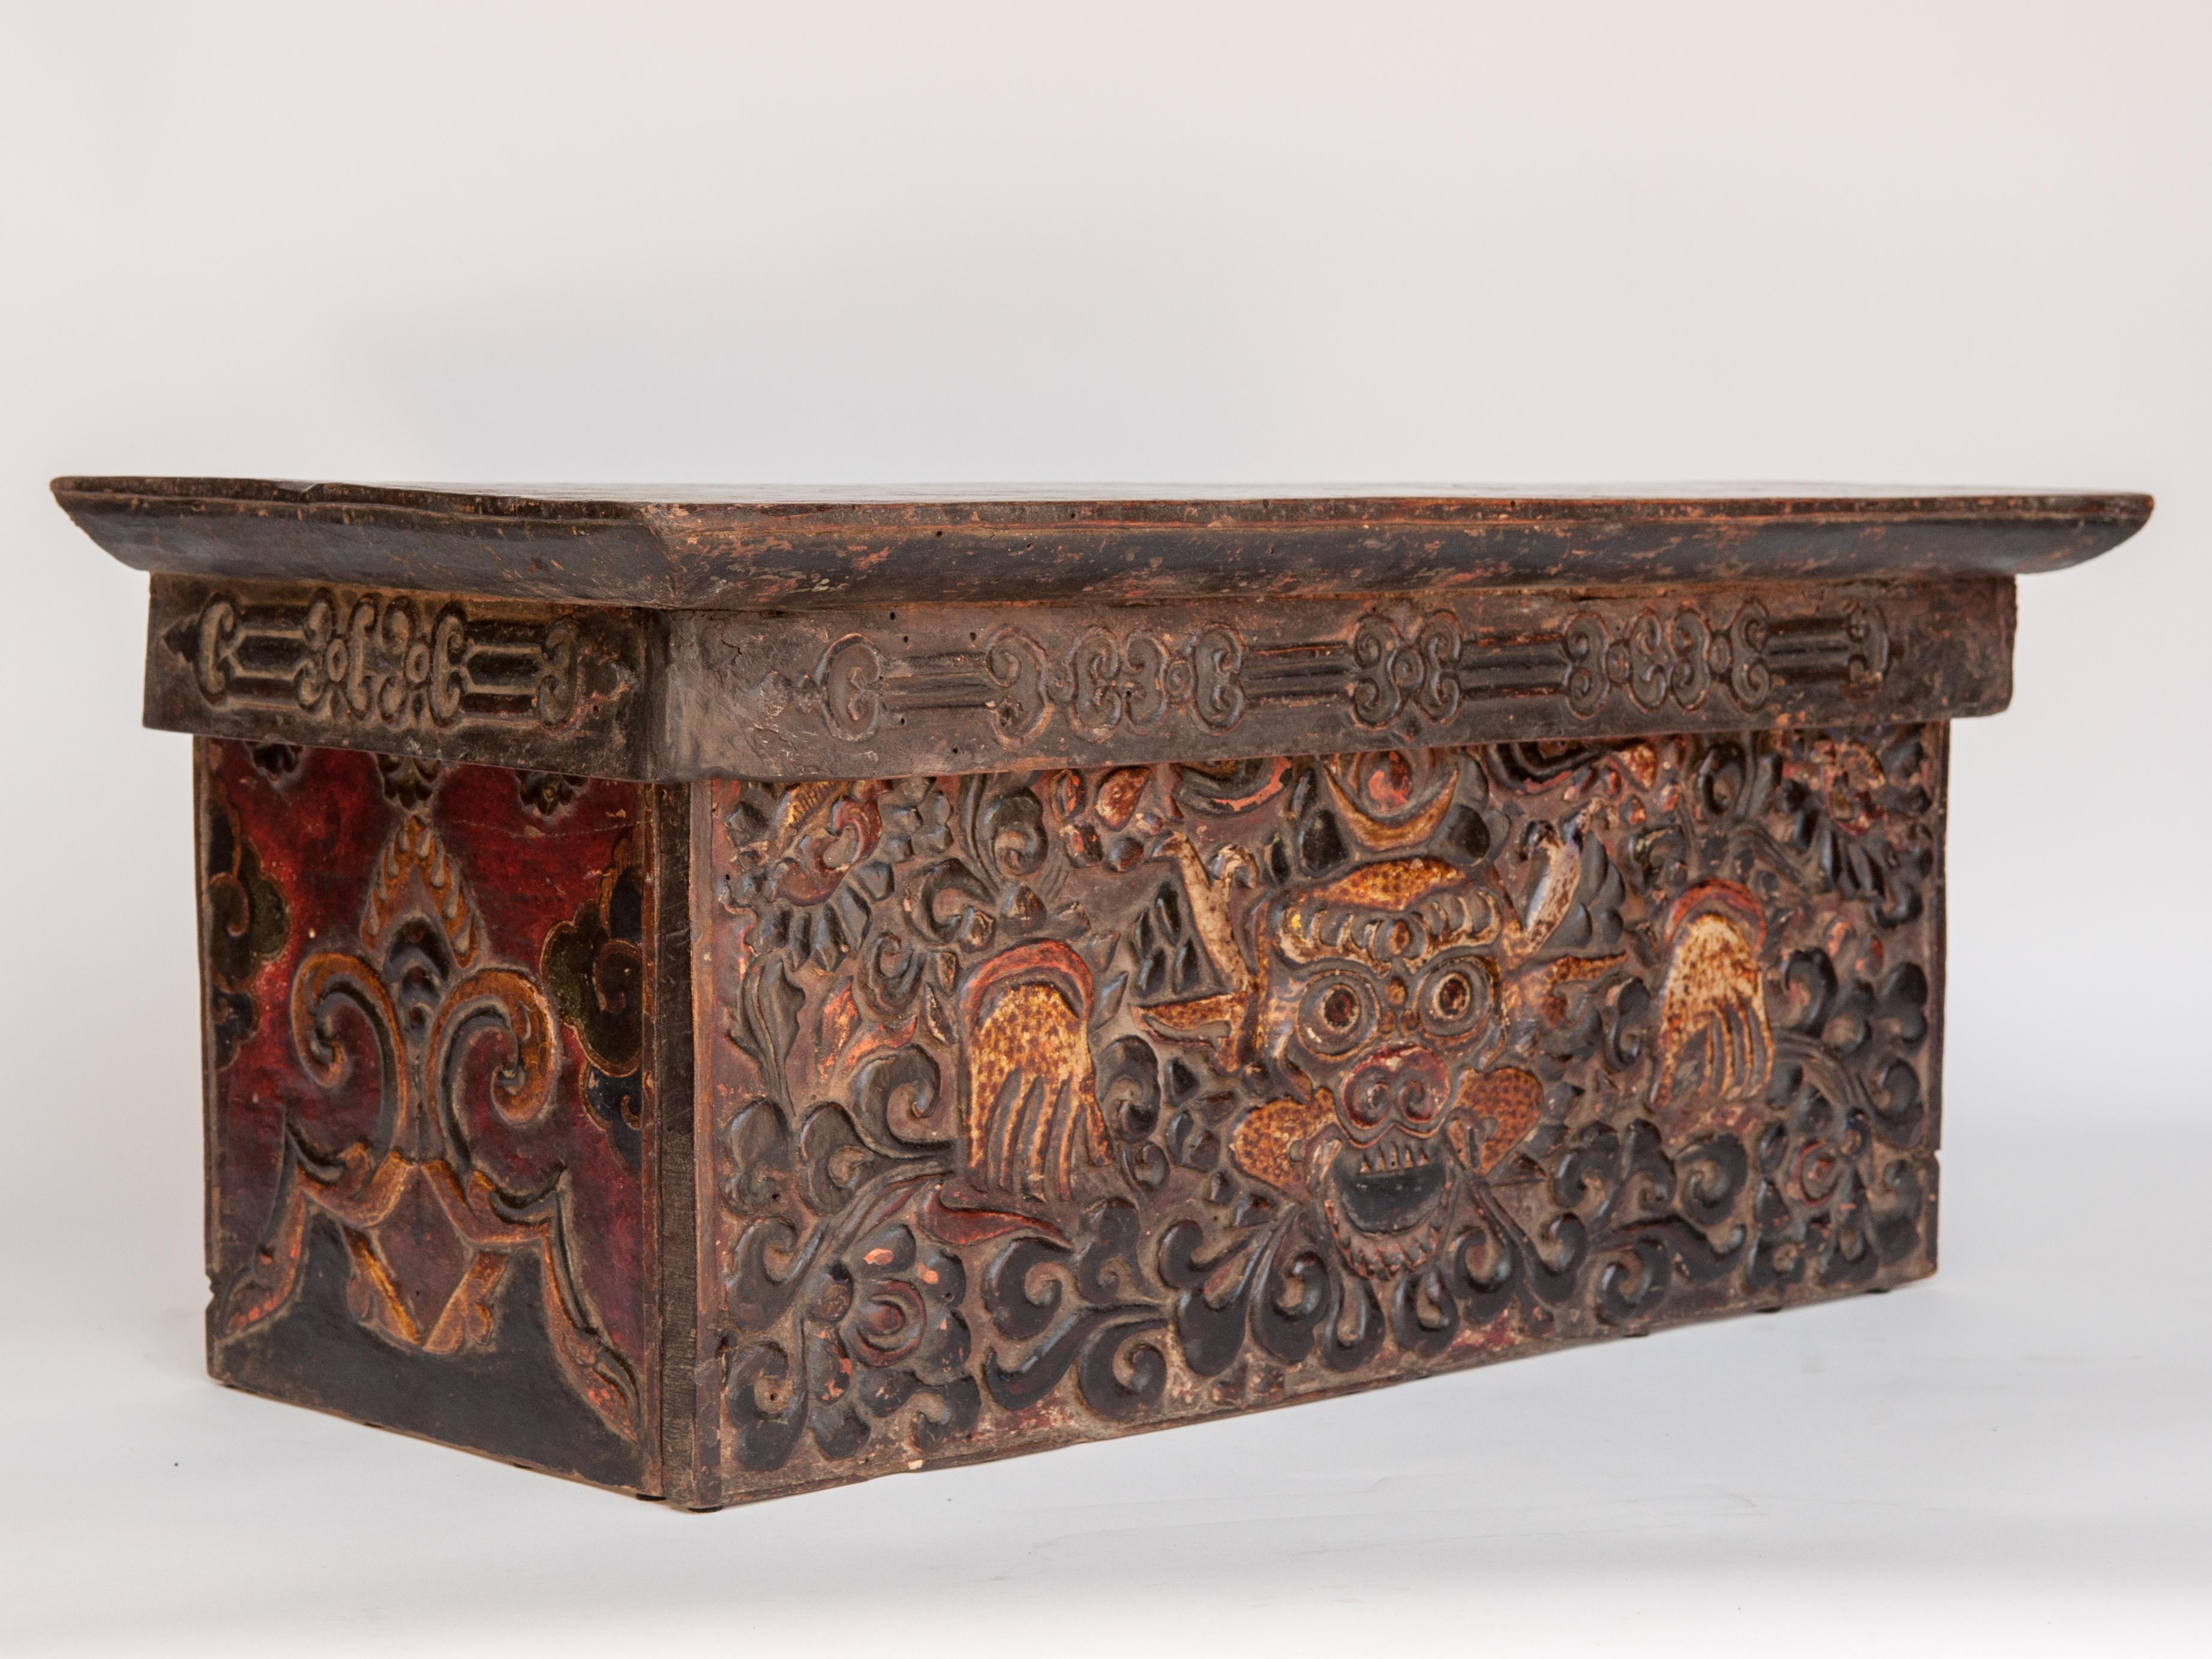 Antique Choktse - a multipurpose tea and writing table from Tibet. Hand painted. Dating to the 19th century or earlier.
This table is of light wood, probably fir, the design worked in a raised gesso technique called kyungbur, and then hand painted.